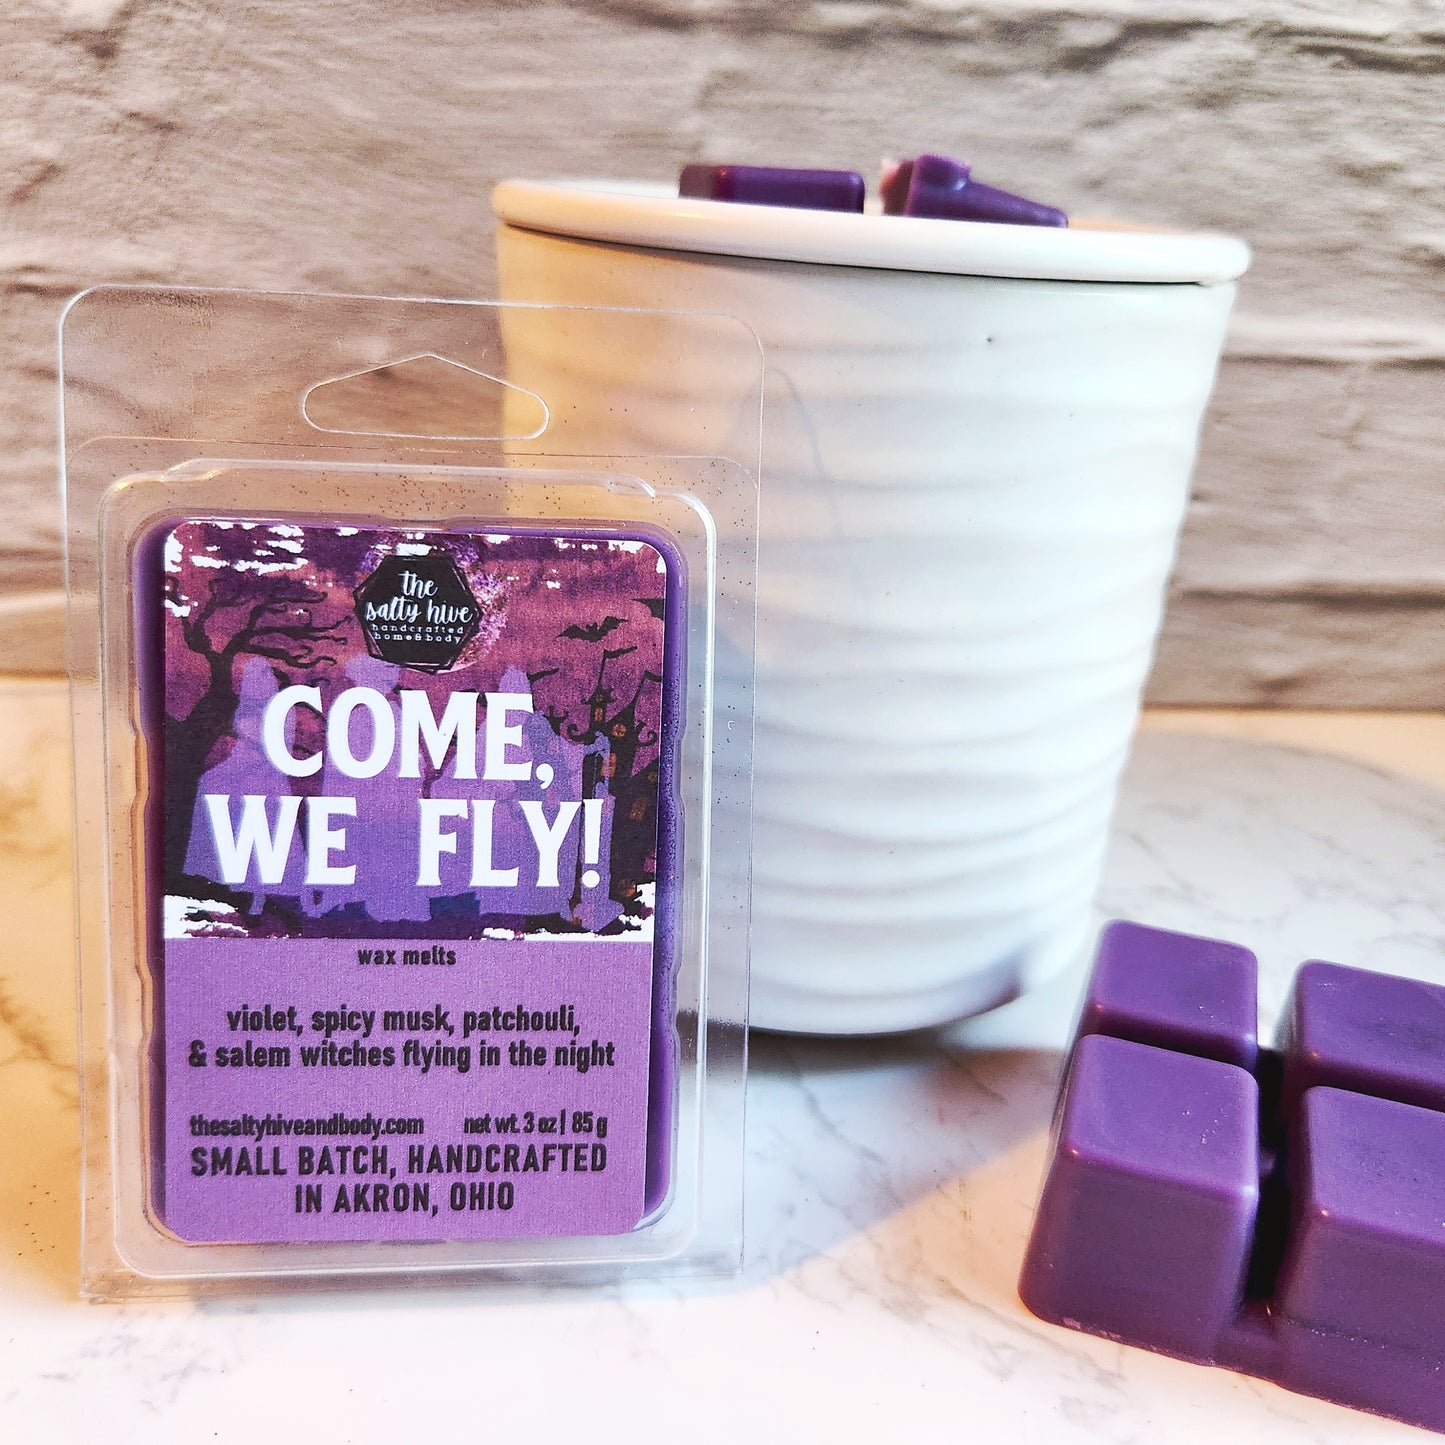 come, we fly! wax melts - the salty hive